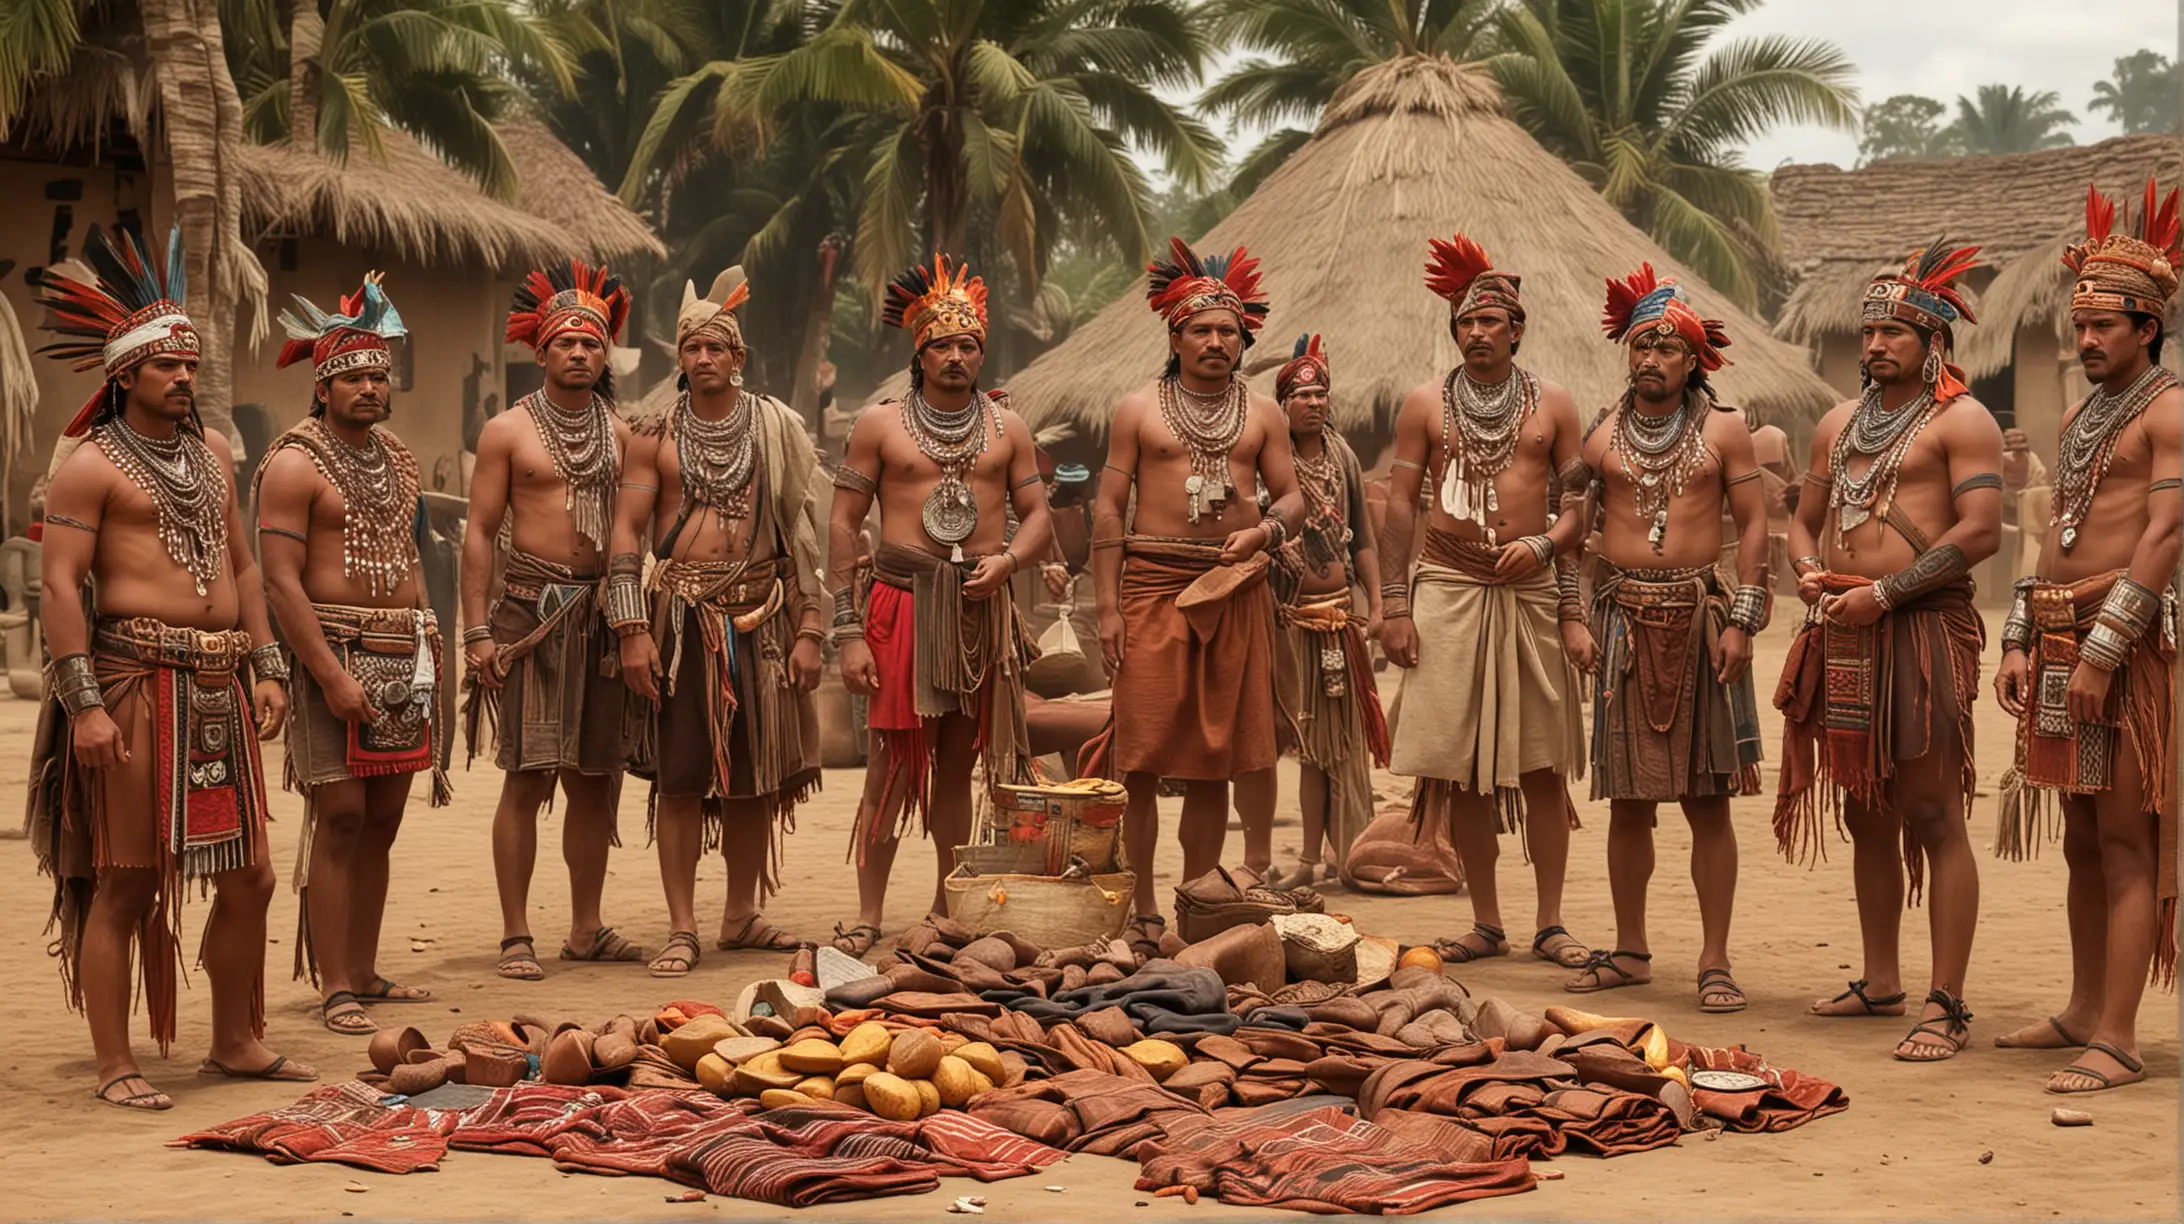 Aztec Merchants Trading with Cocoa and Blankets in Ancient Exchange